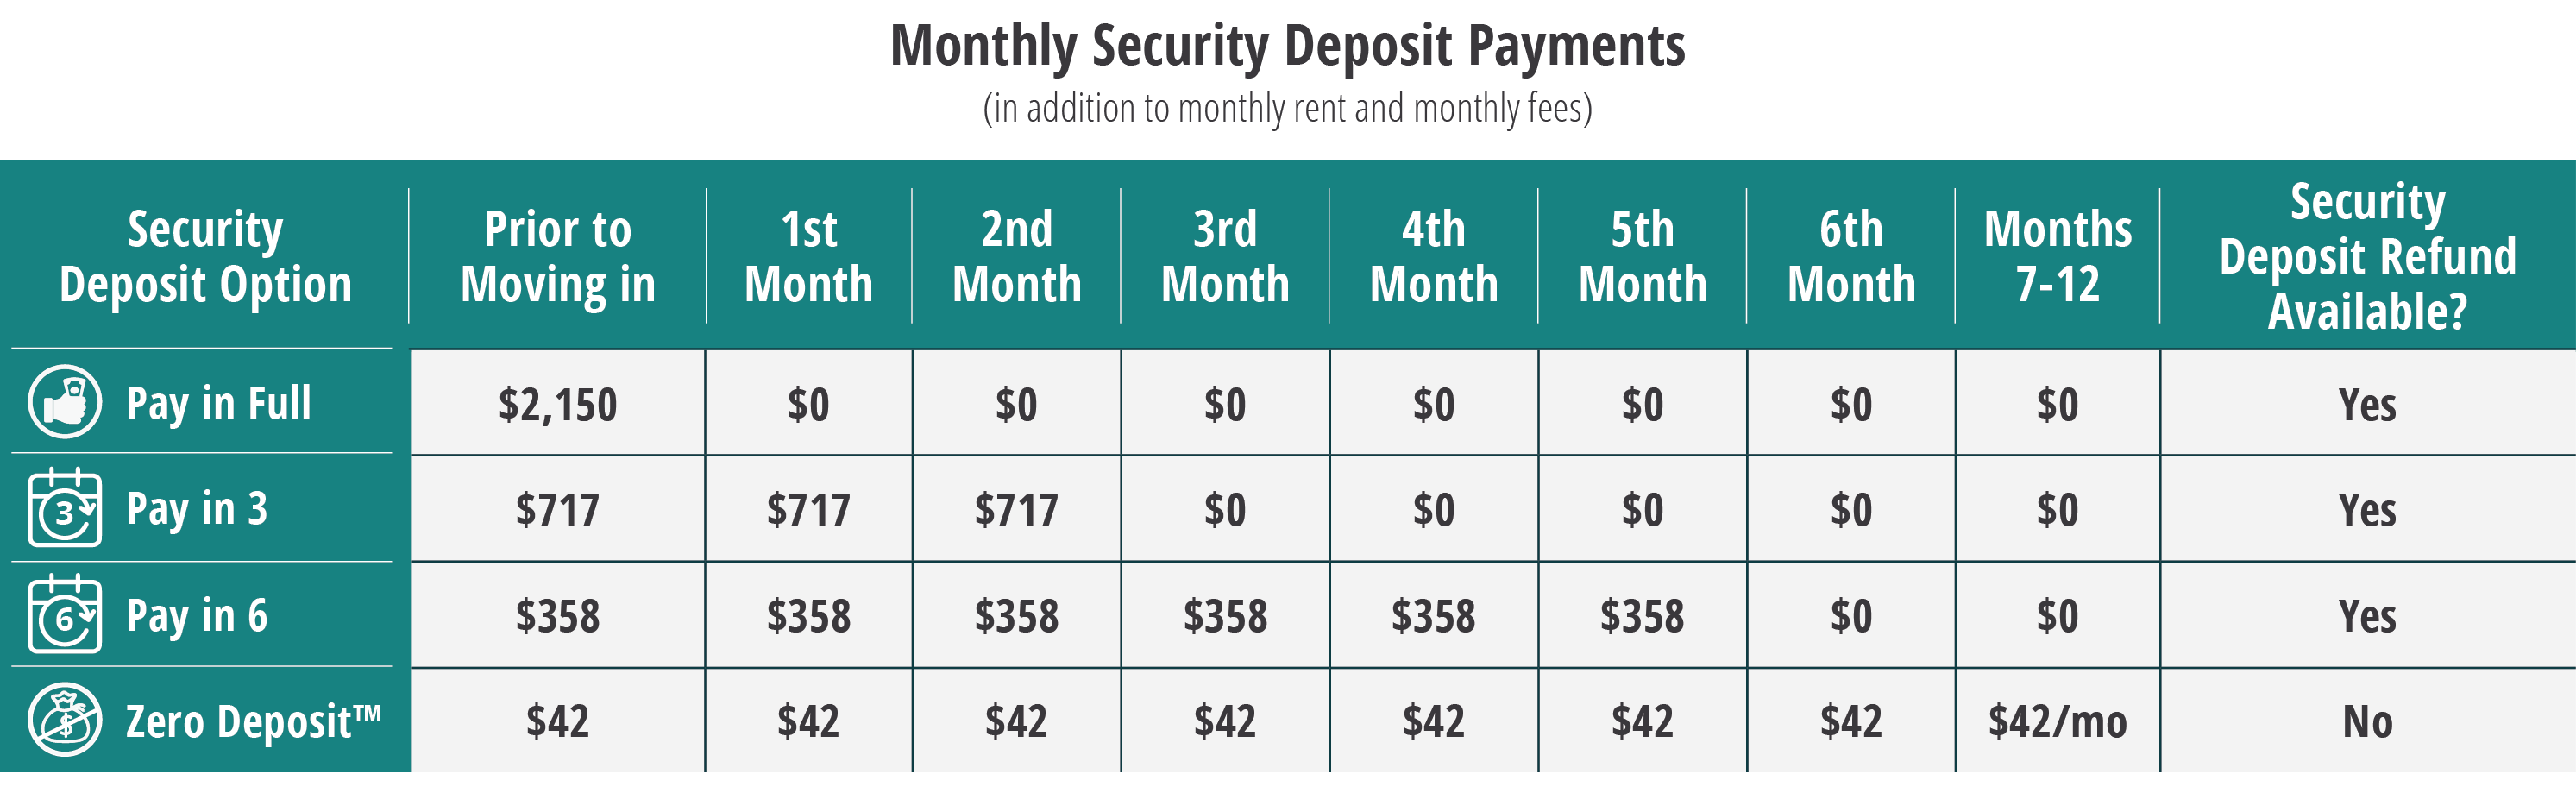 Monthly Security Deposit Payments